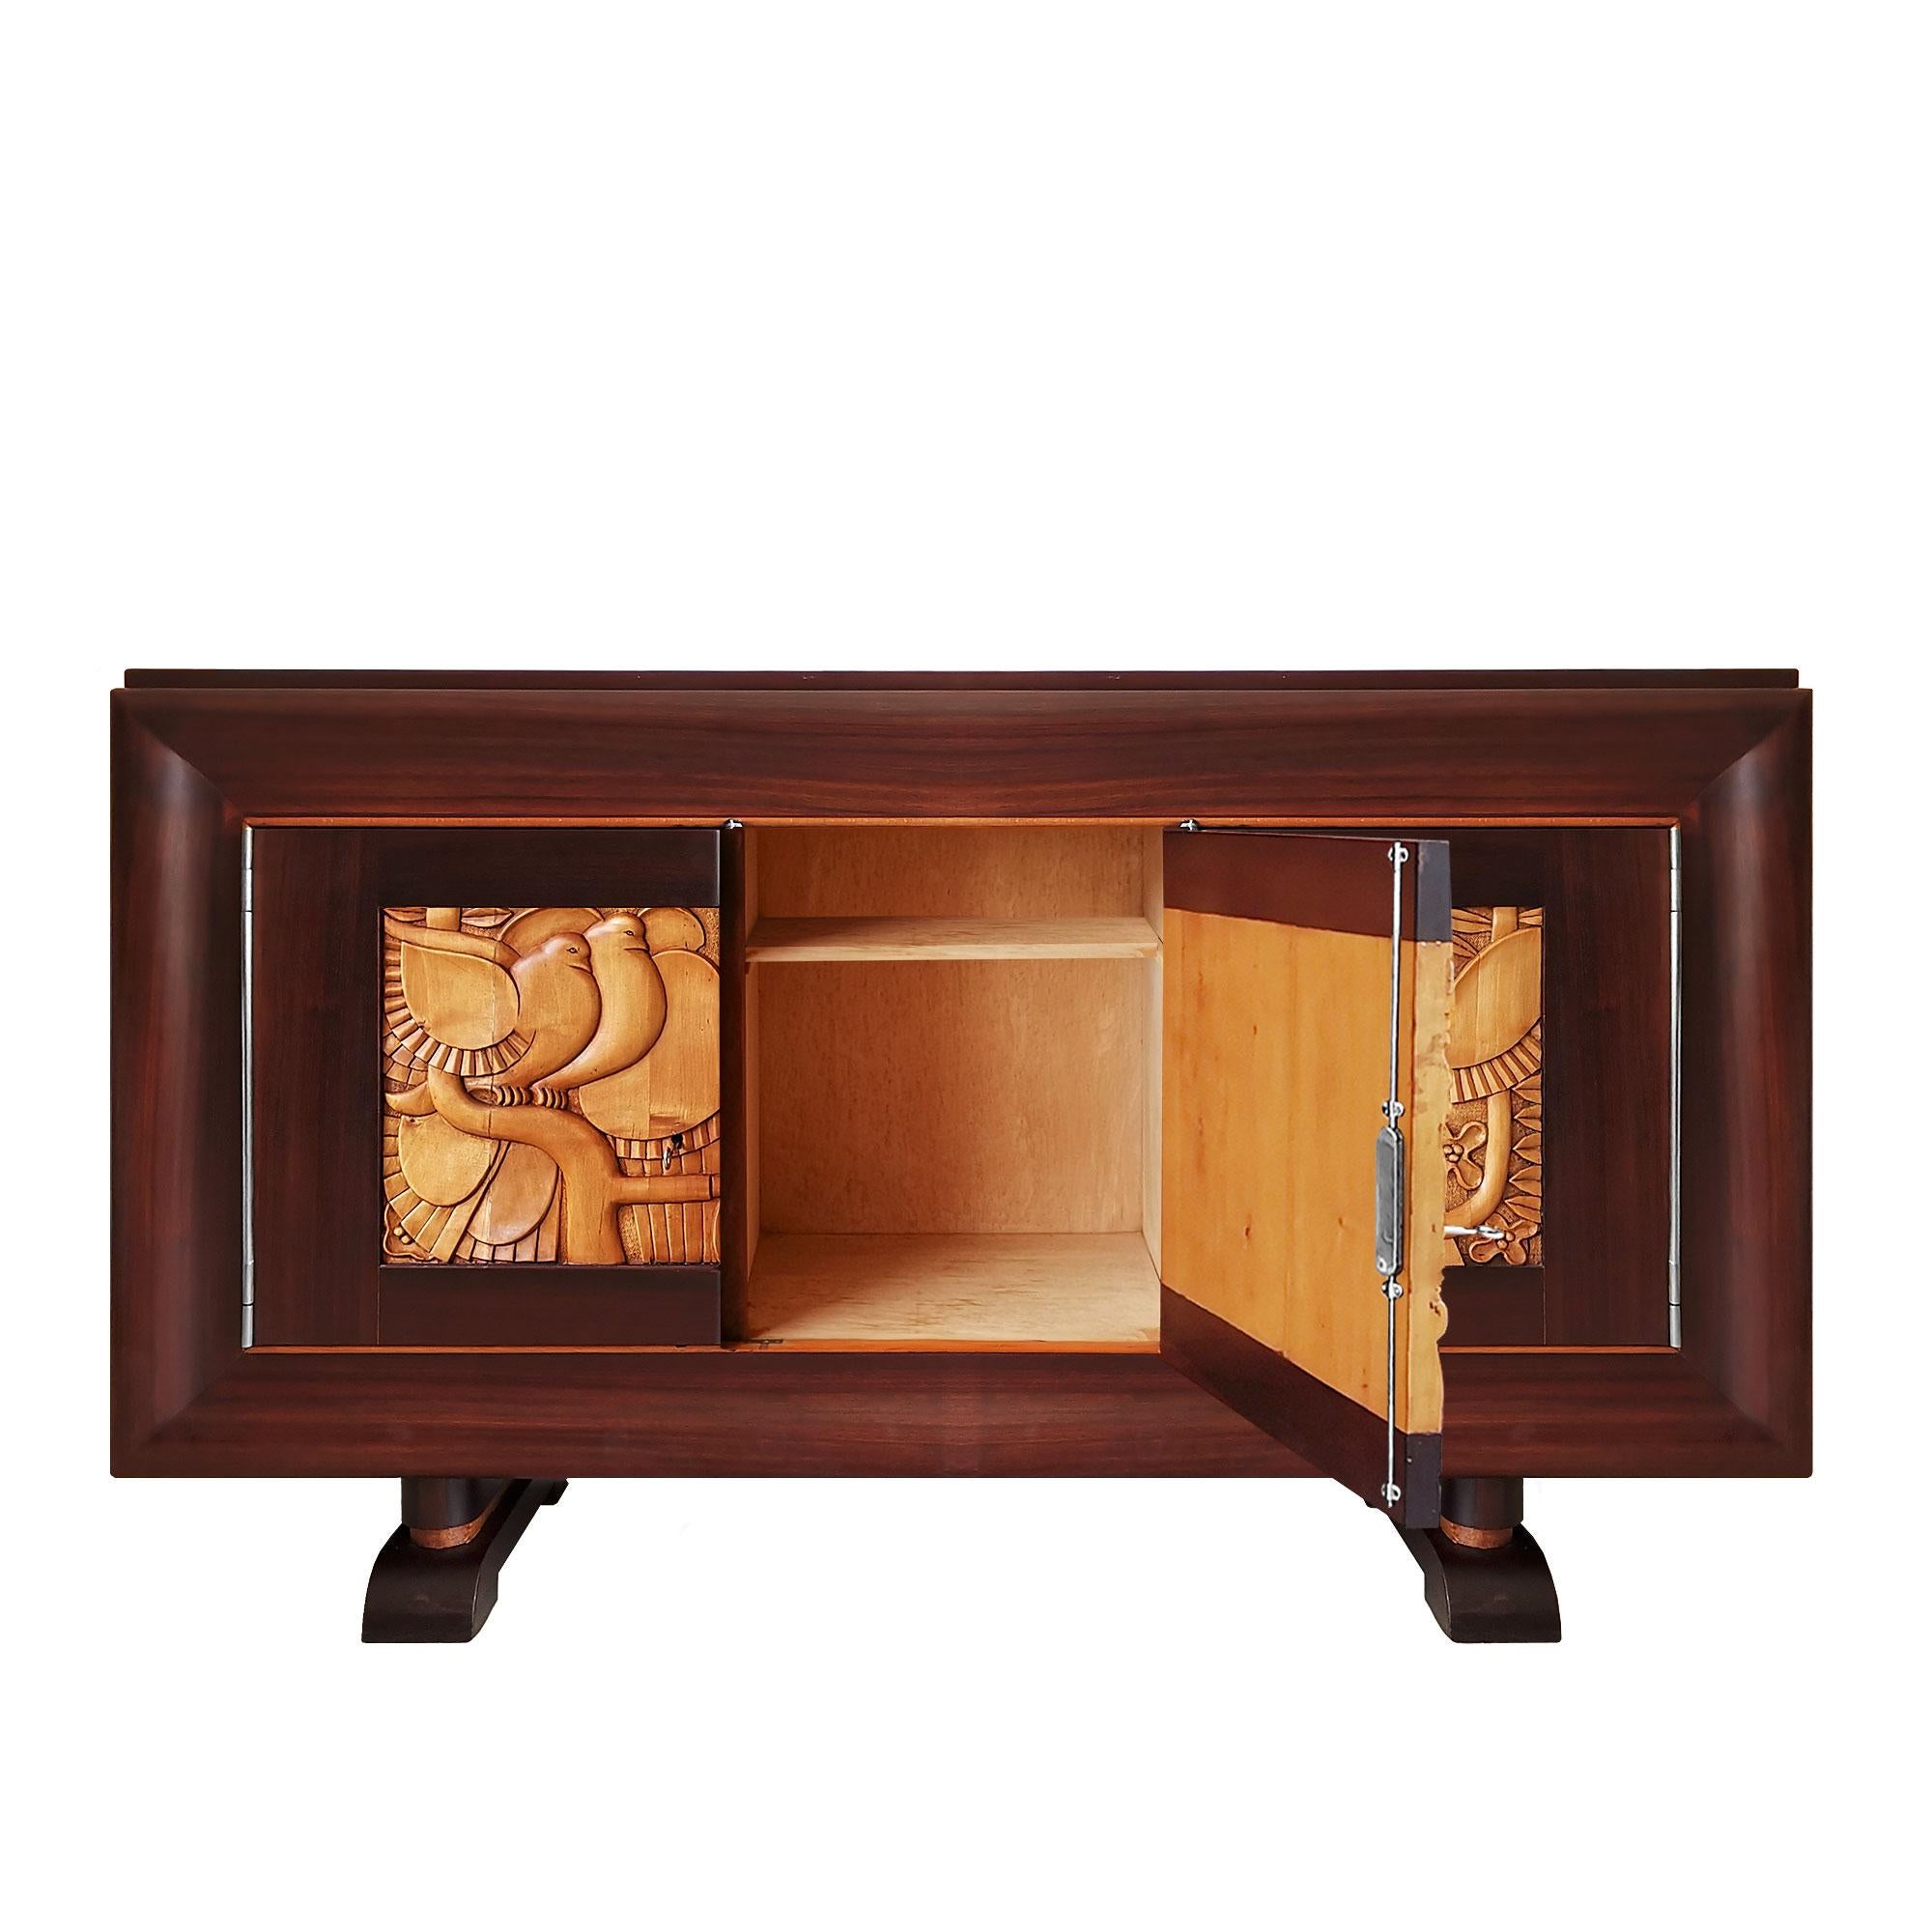 1940's Sideboard with Three Doors, Bubinga Wood, Carved Maple, Bronze, France 1